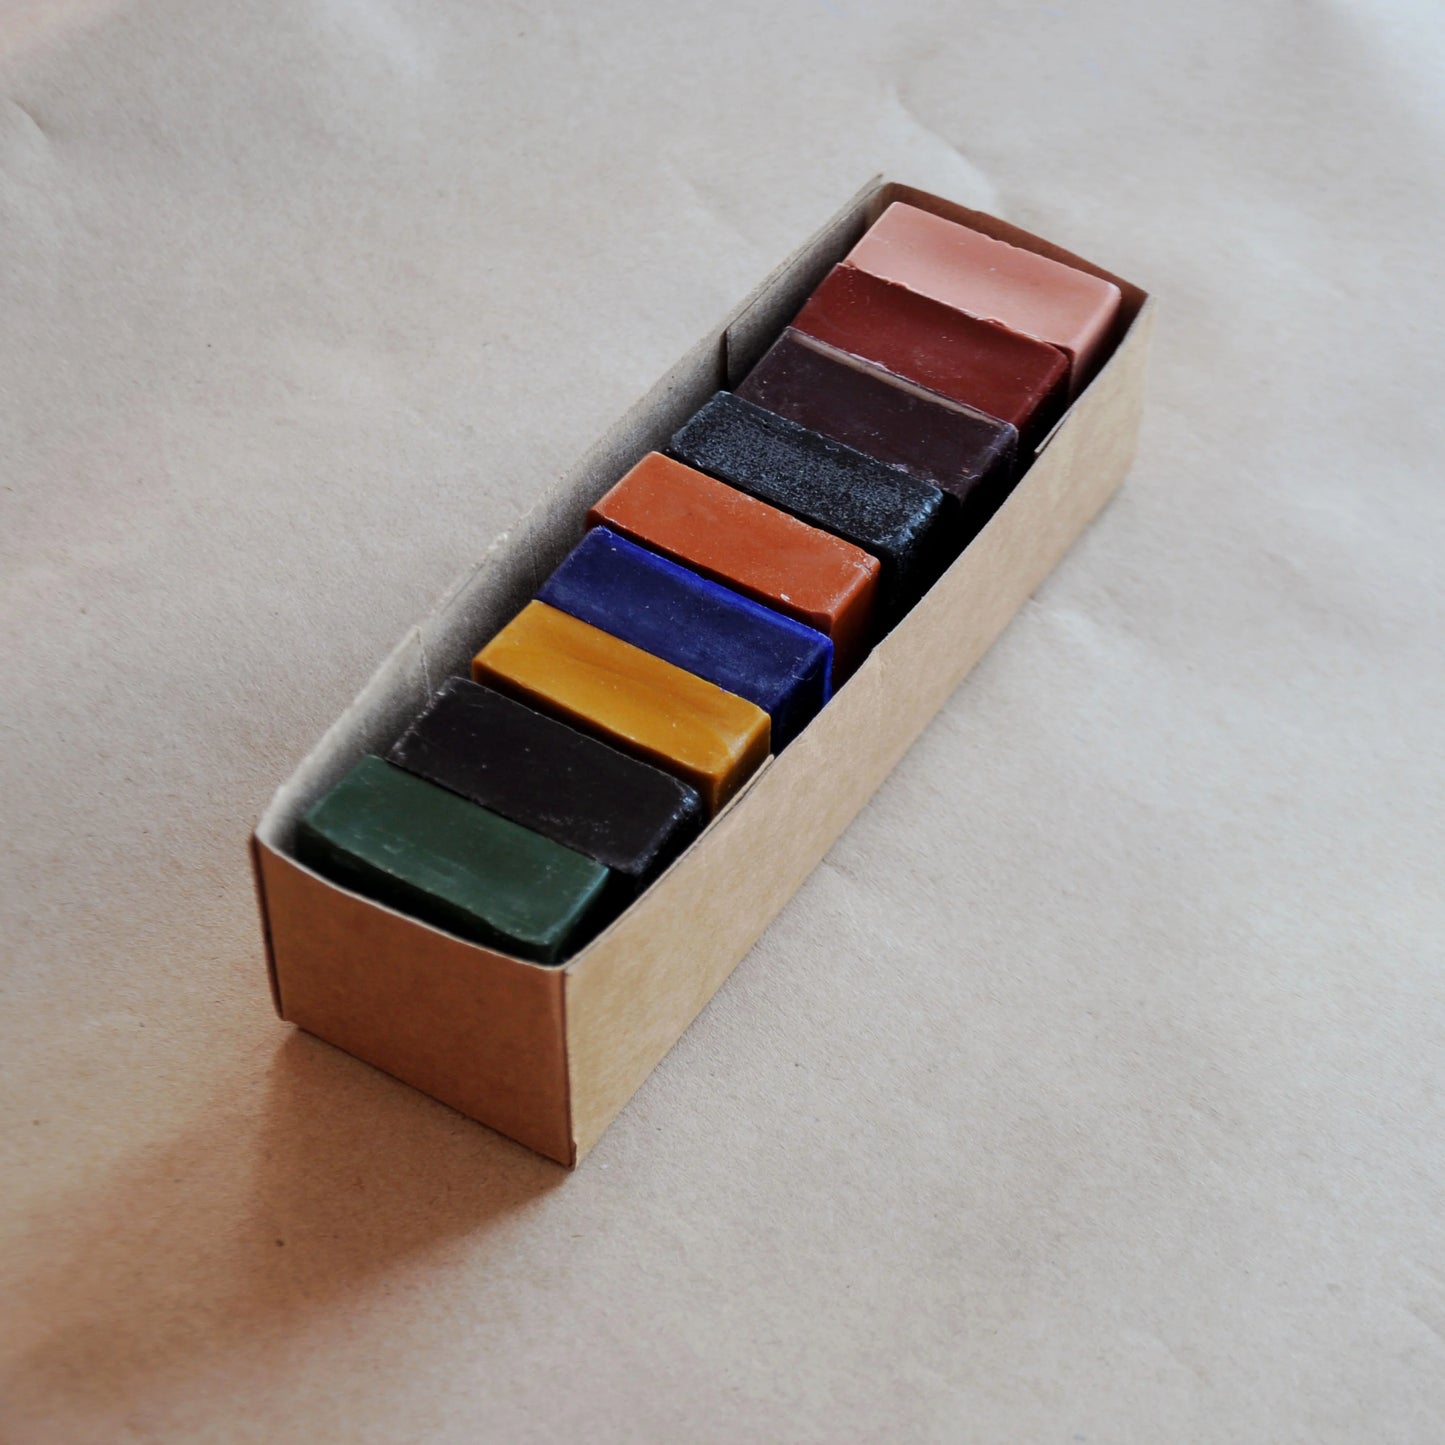 Beeswax block rubbing crayons in a box